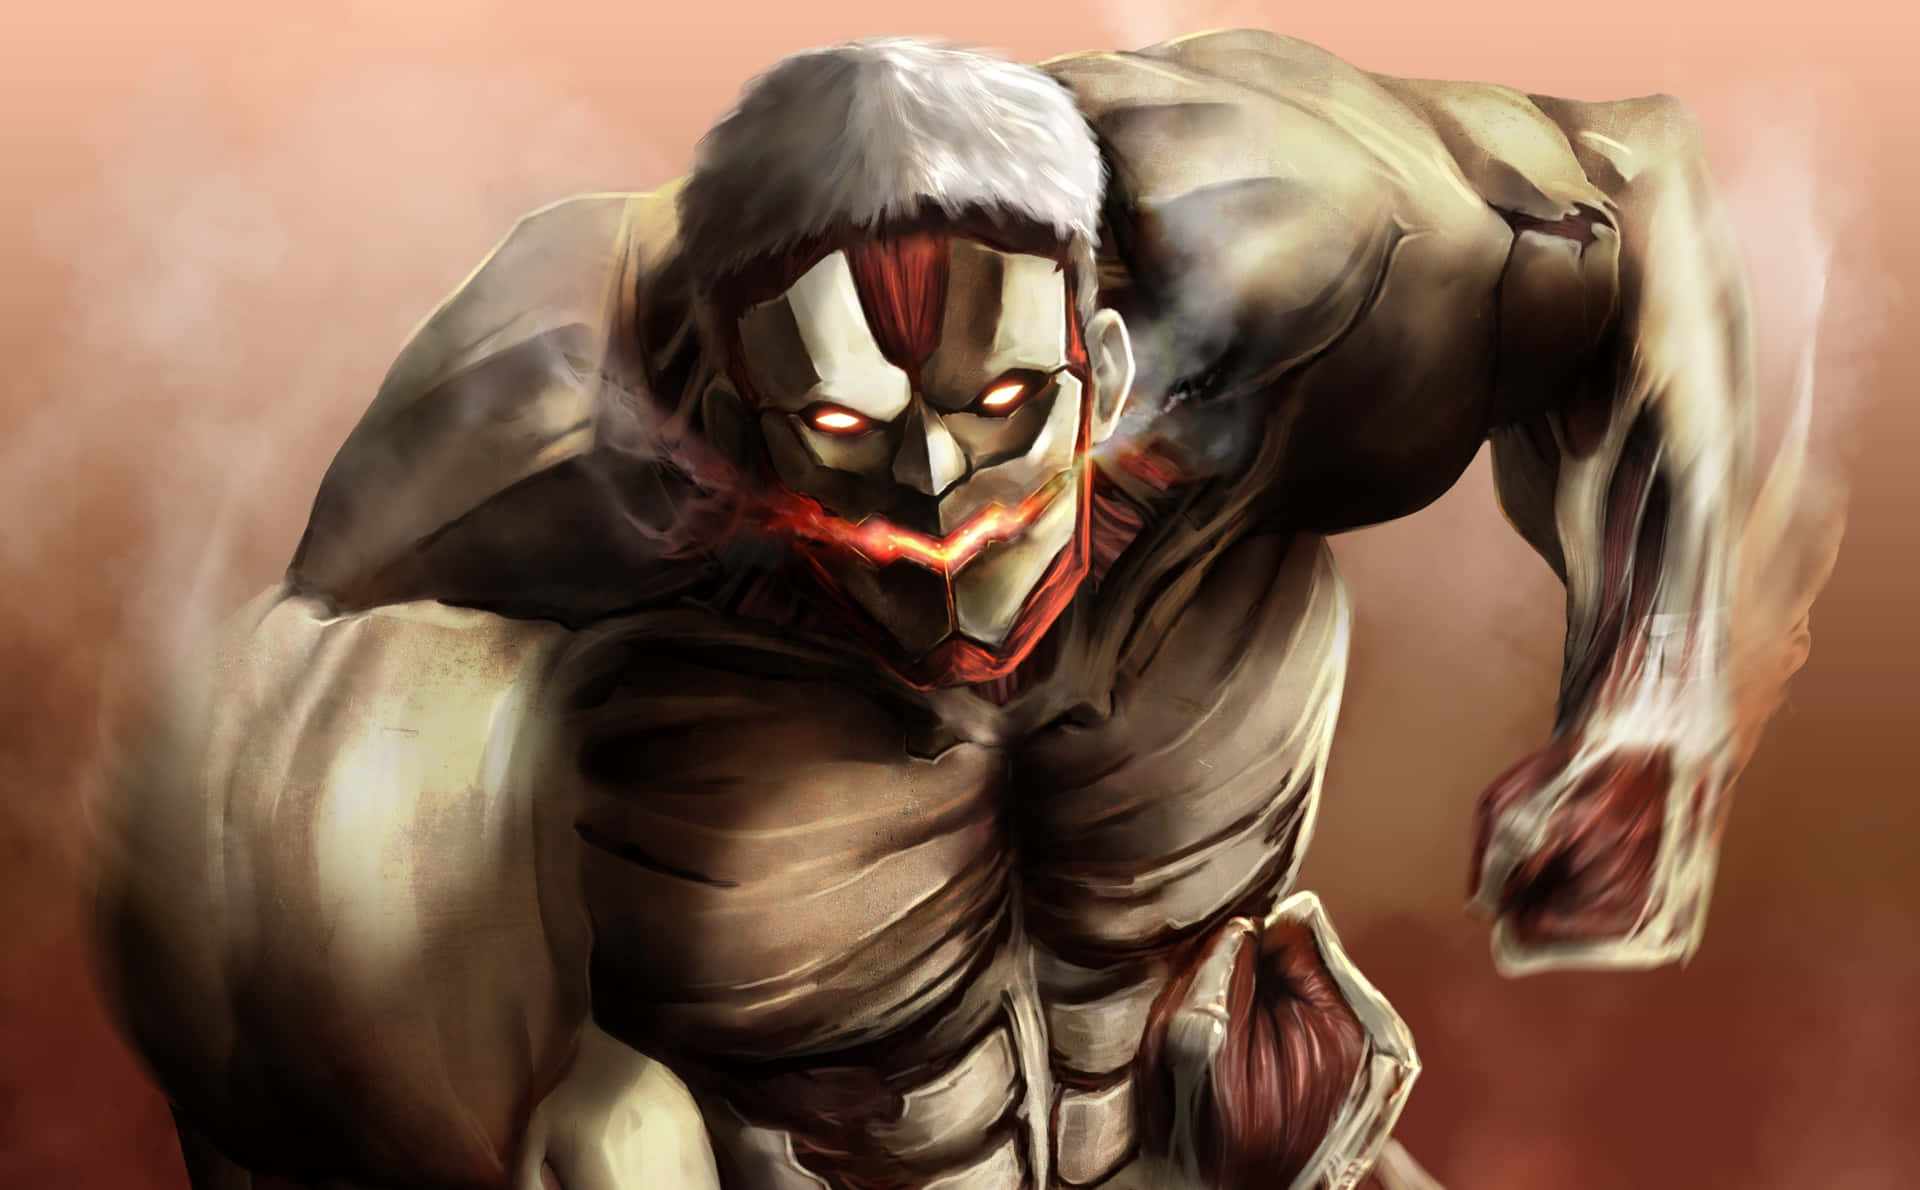 Witness the power of the Armored Titan in this breathtaking image" Wallpaper